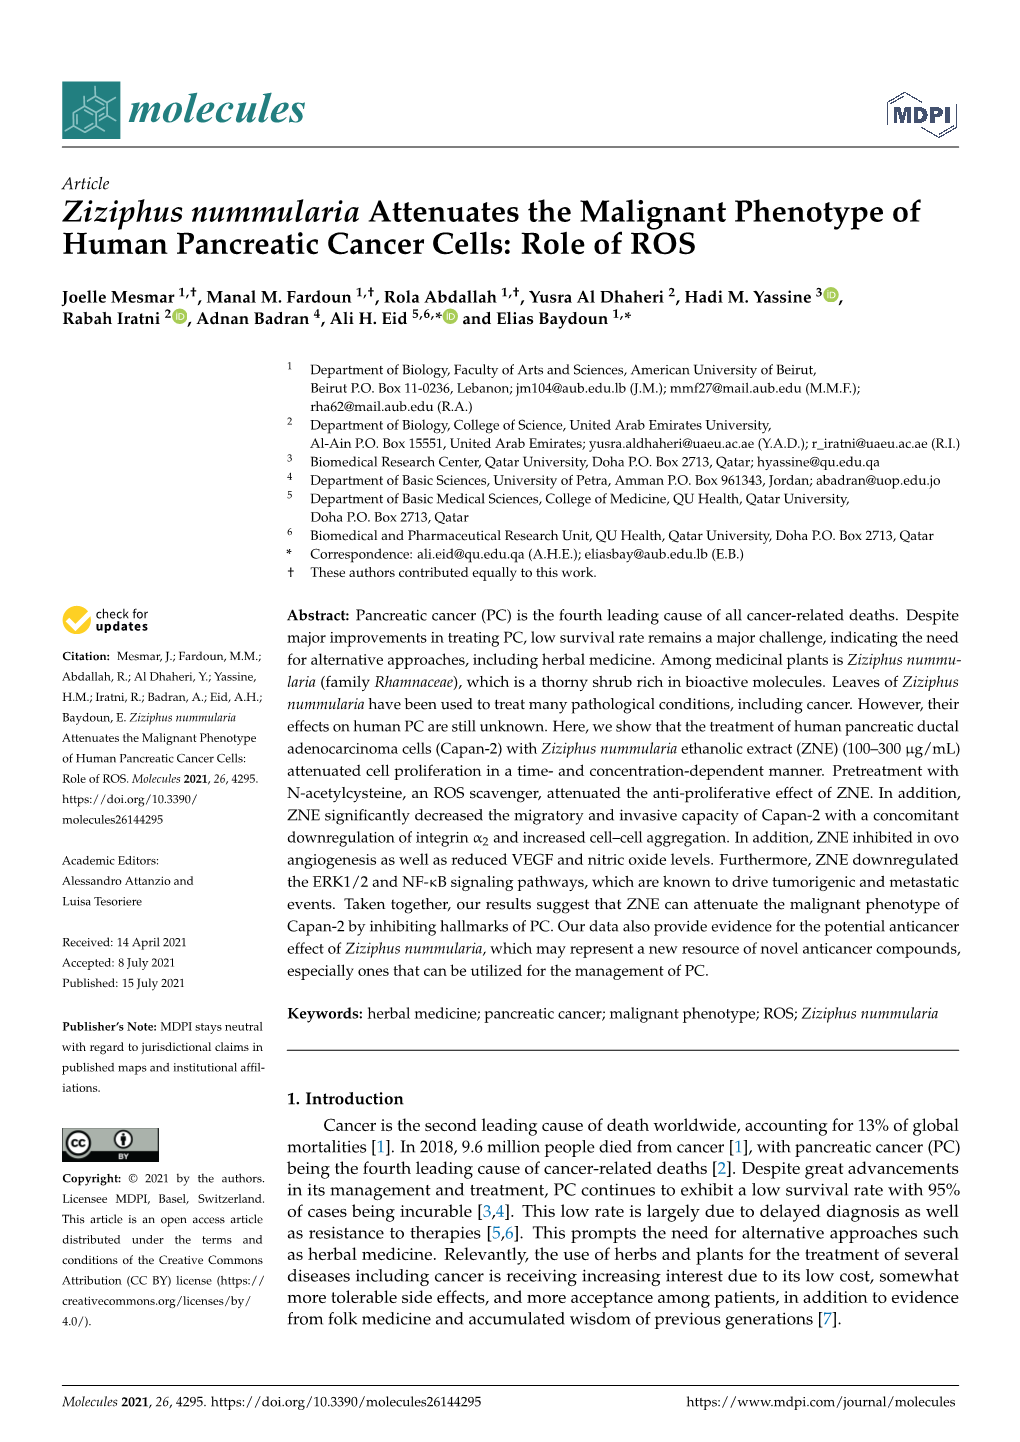 Ziziphus Nummularia Attenuates the Malignant Phenotype of Human Pancreatic Cancer Cells: Role of ROS